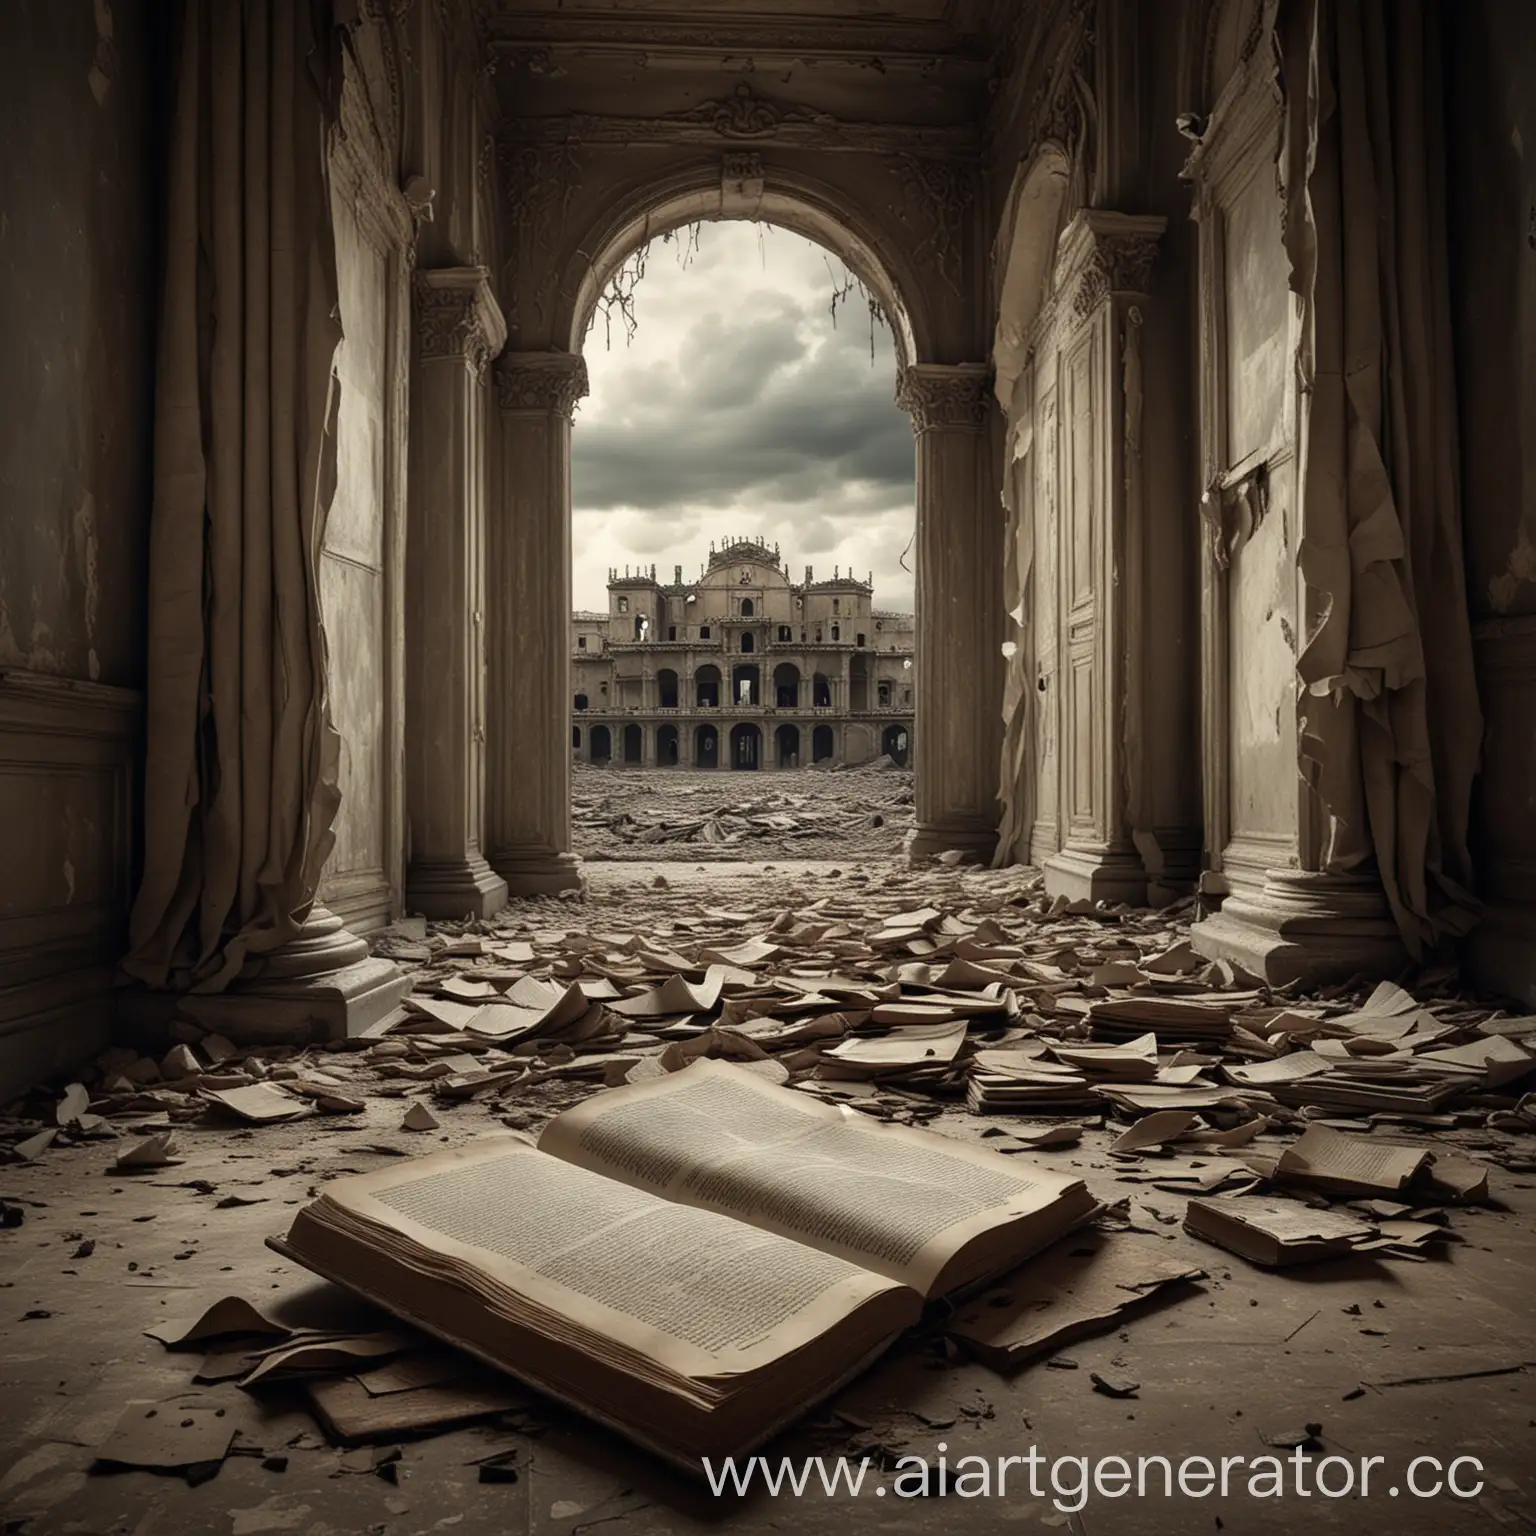 Abandoned-Palace-with-Torn-Curtains-and-Desolate-Book-Symbolic-Depiction-of-Illusions-Collapse